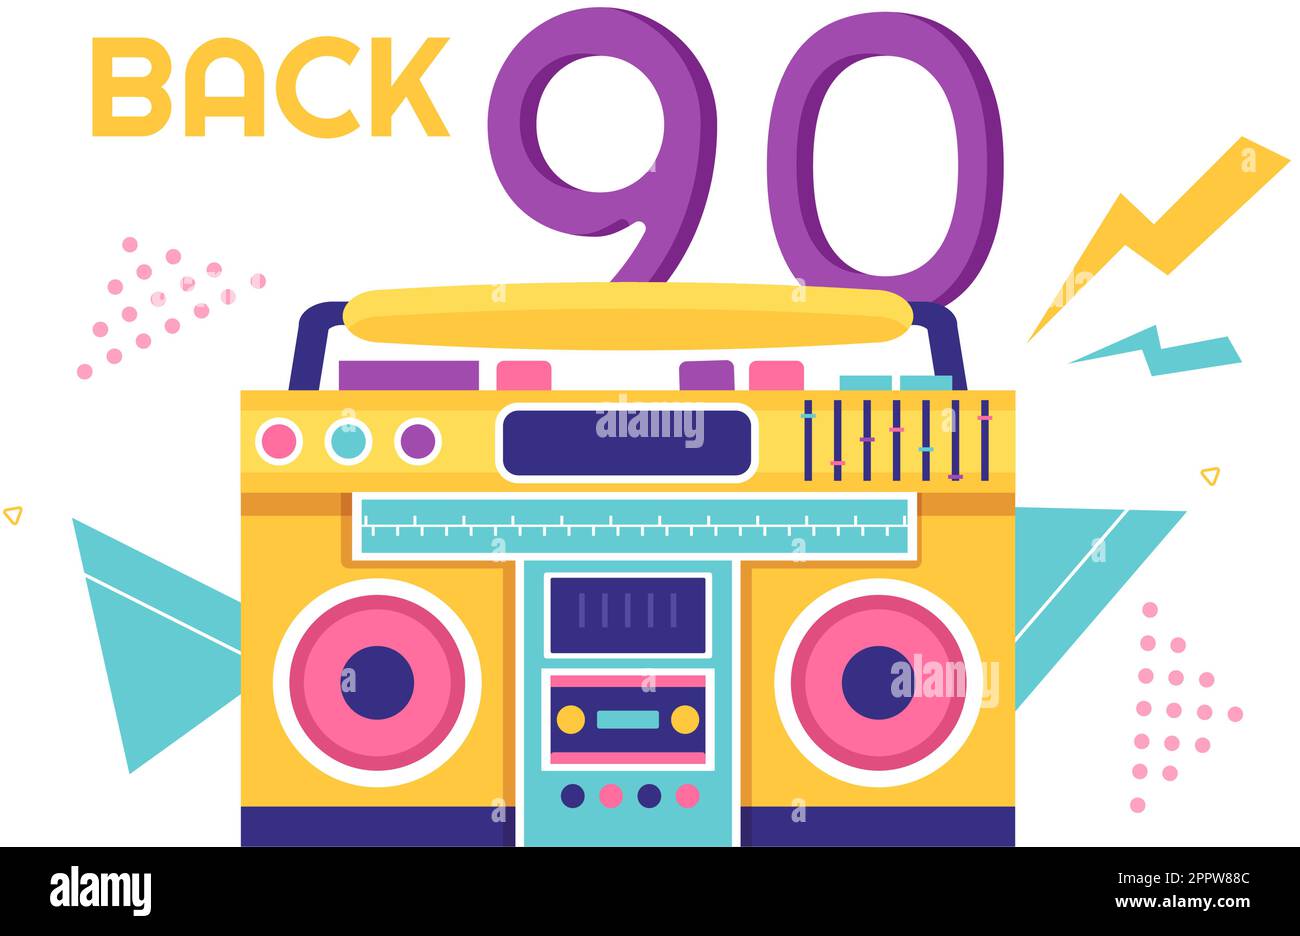 90s Retro Party Cartoon Background Illustration with Nineties Music, Sneakers, Radio, Dance Time and Tape Cassette in Trendy Flat Style Design Stock Vector